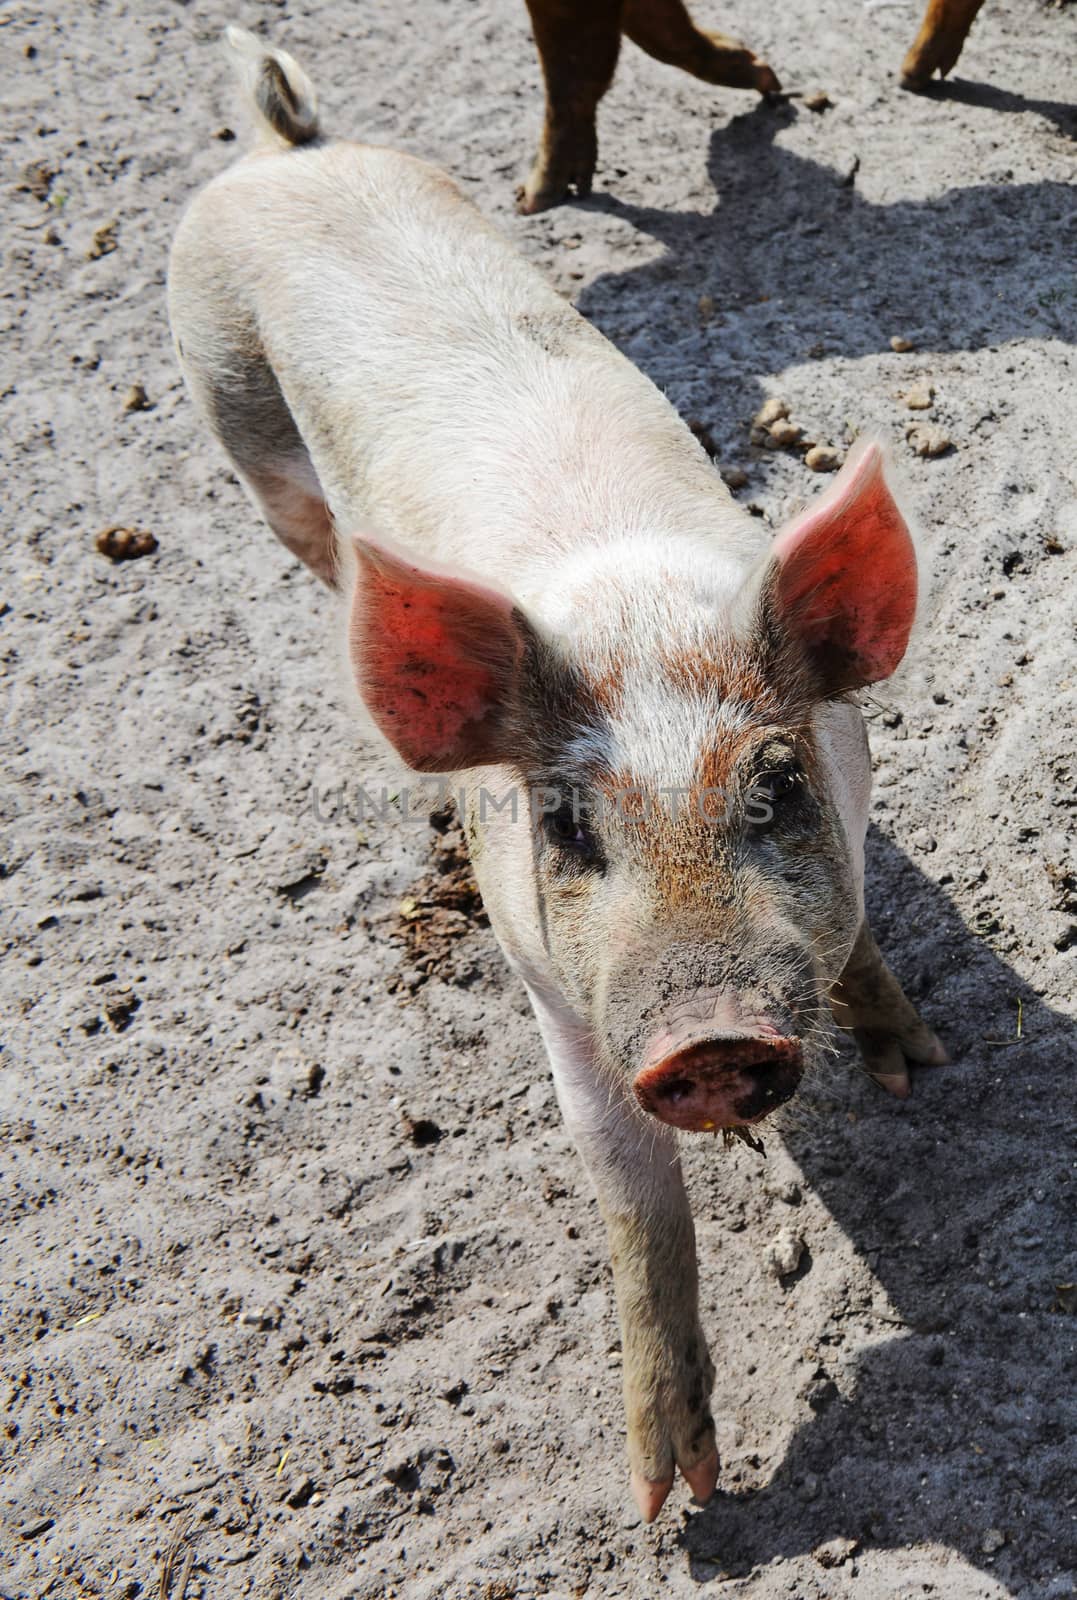 close-up of pig by ftlaudgirl